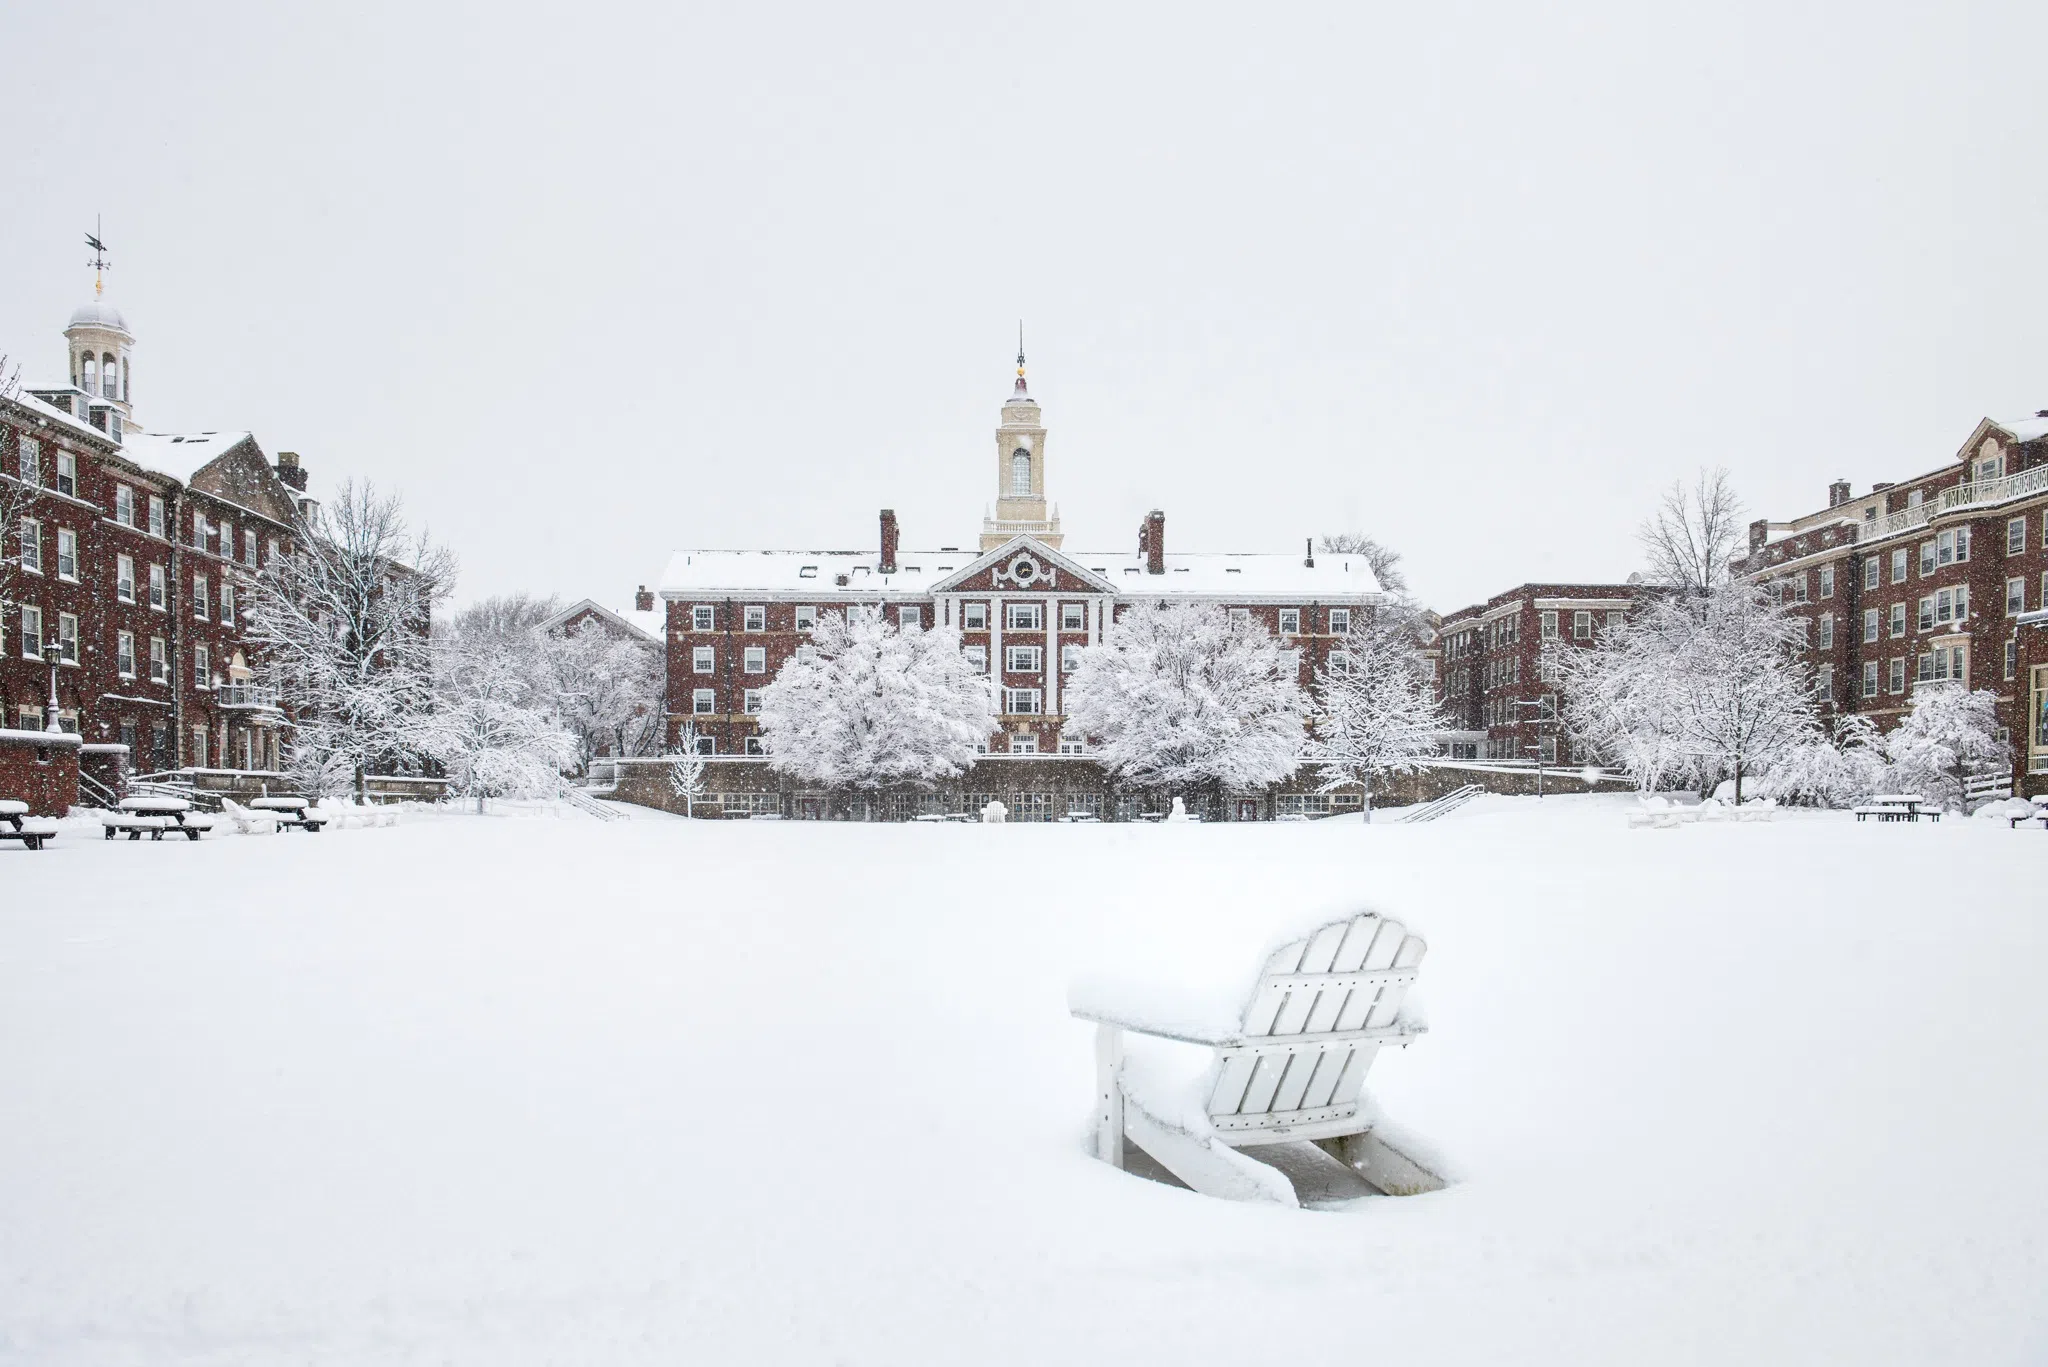 Dormitory building and adjacent quad blanketed in snow